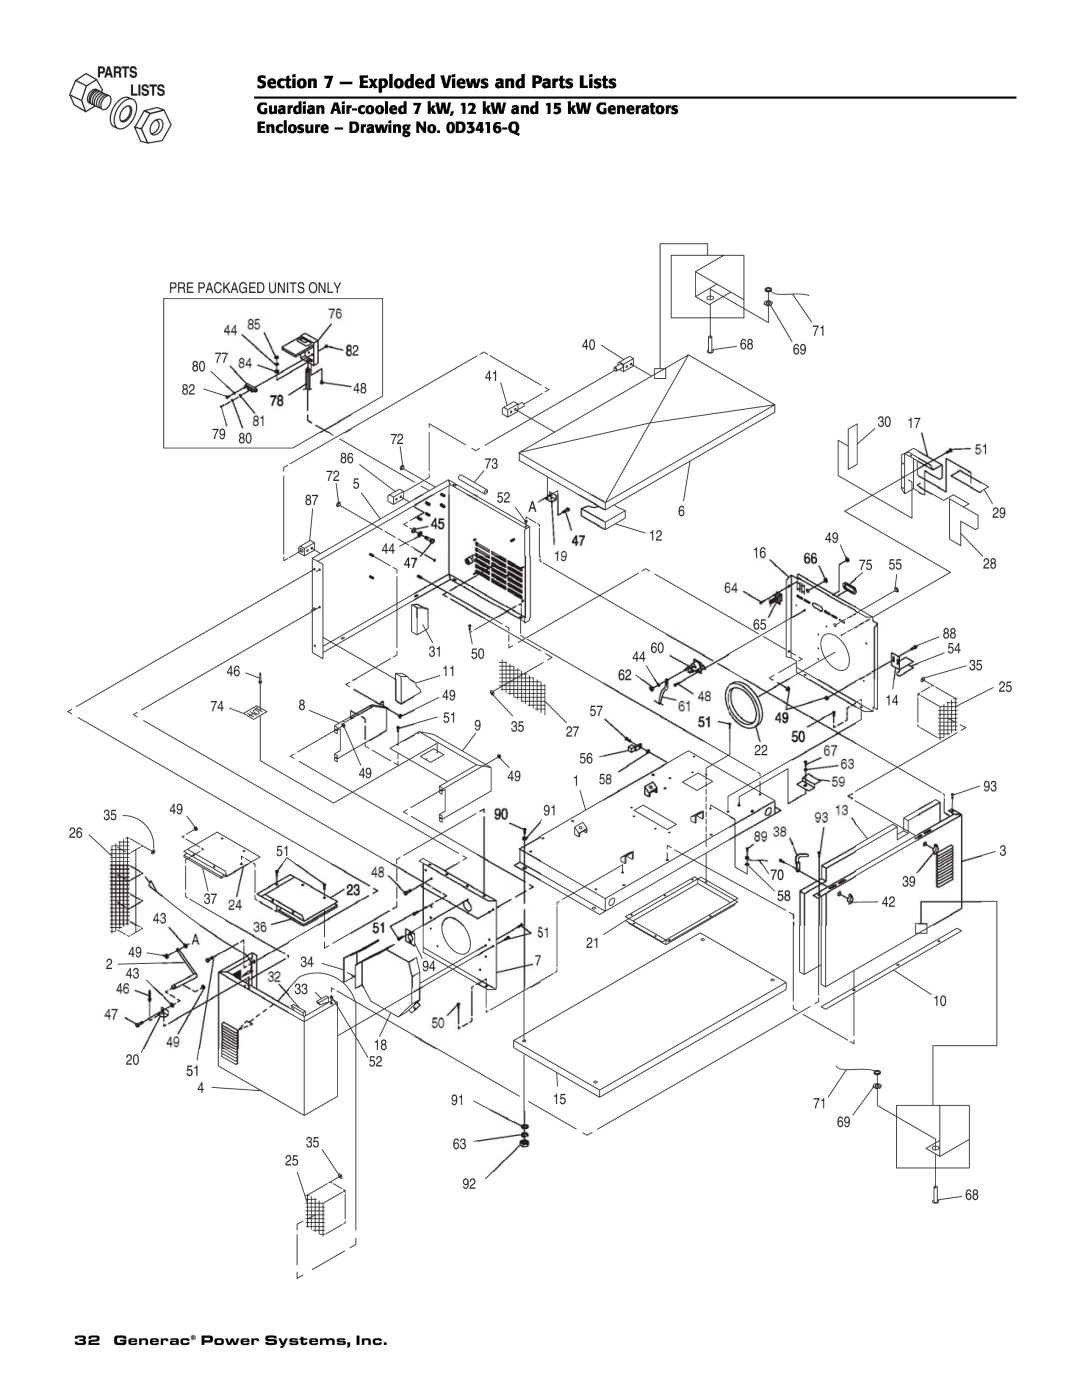 Generac Power Systems 04456-1, 04390-1, 04389-1 owner manual Exploded Views and Parts Lists, Generac Power Systems, Inc 